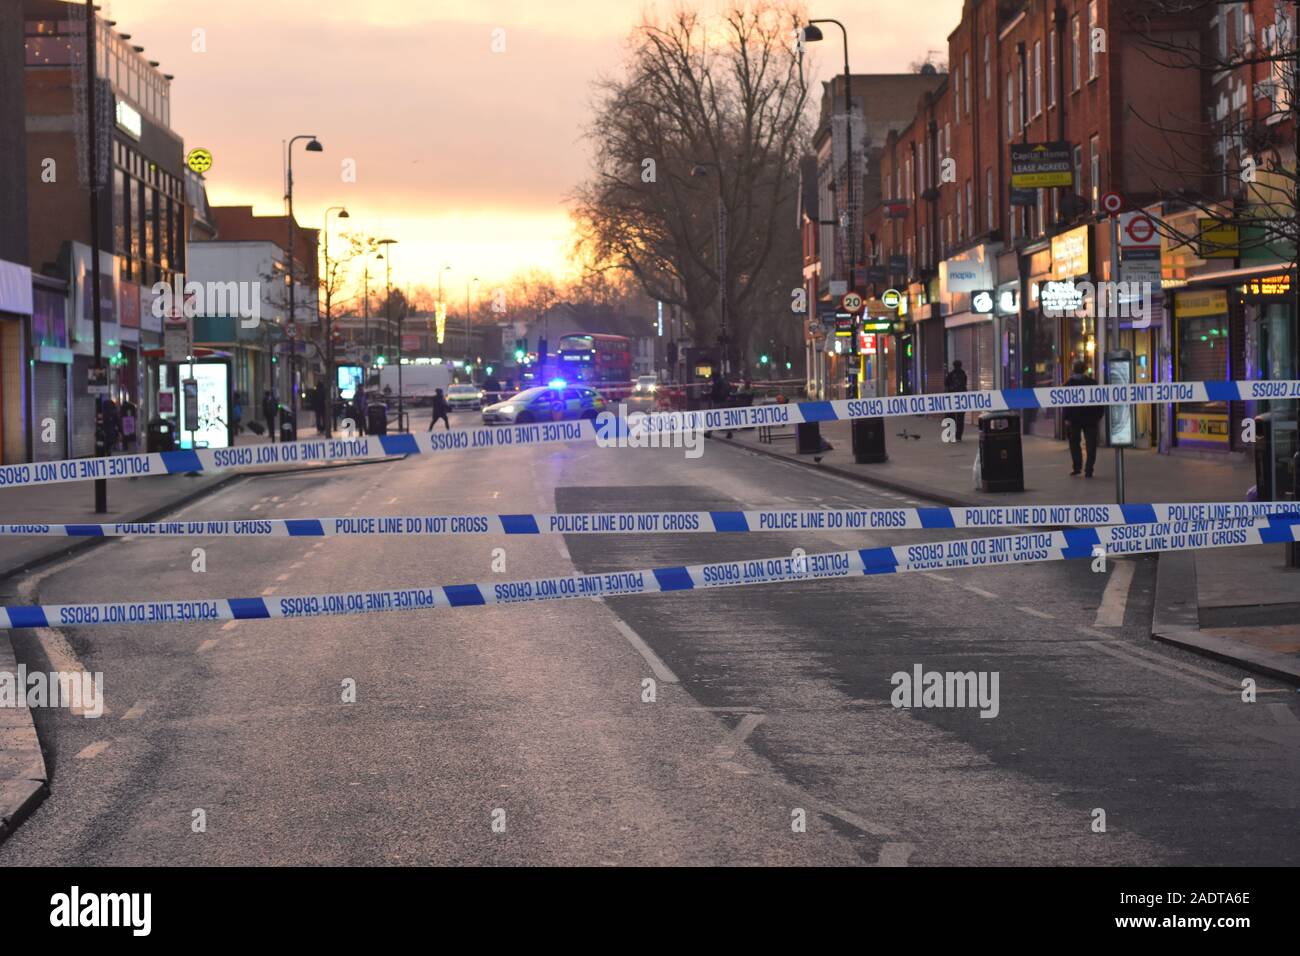 A shooting took place on Woodgreen High street late last night. One male was hit during the shooting and was rushed to a North London hospital in the early hours of the morning said to be in a life threatening condition. The victim was managed to move across the road after being shot to safety where help could soon arrive to assist. Due to this move from one side of the street to the other the whole road had to be closed and traffic redirected as the majority of Woodgreen High Street taped off to in order to preserve the crime scene. Stock Photo